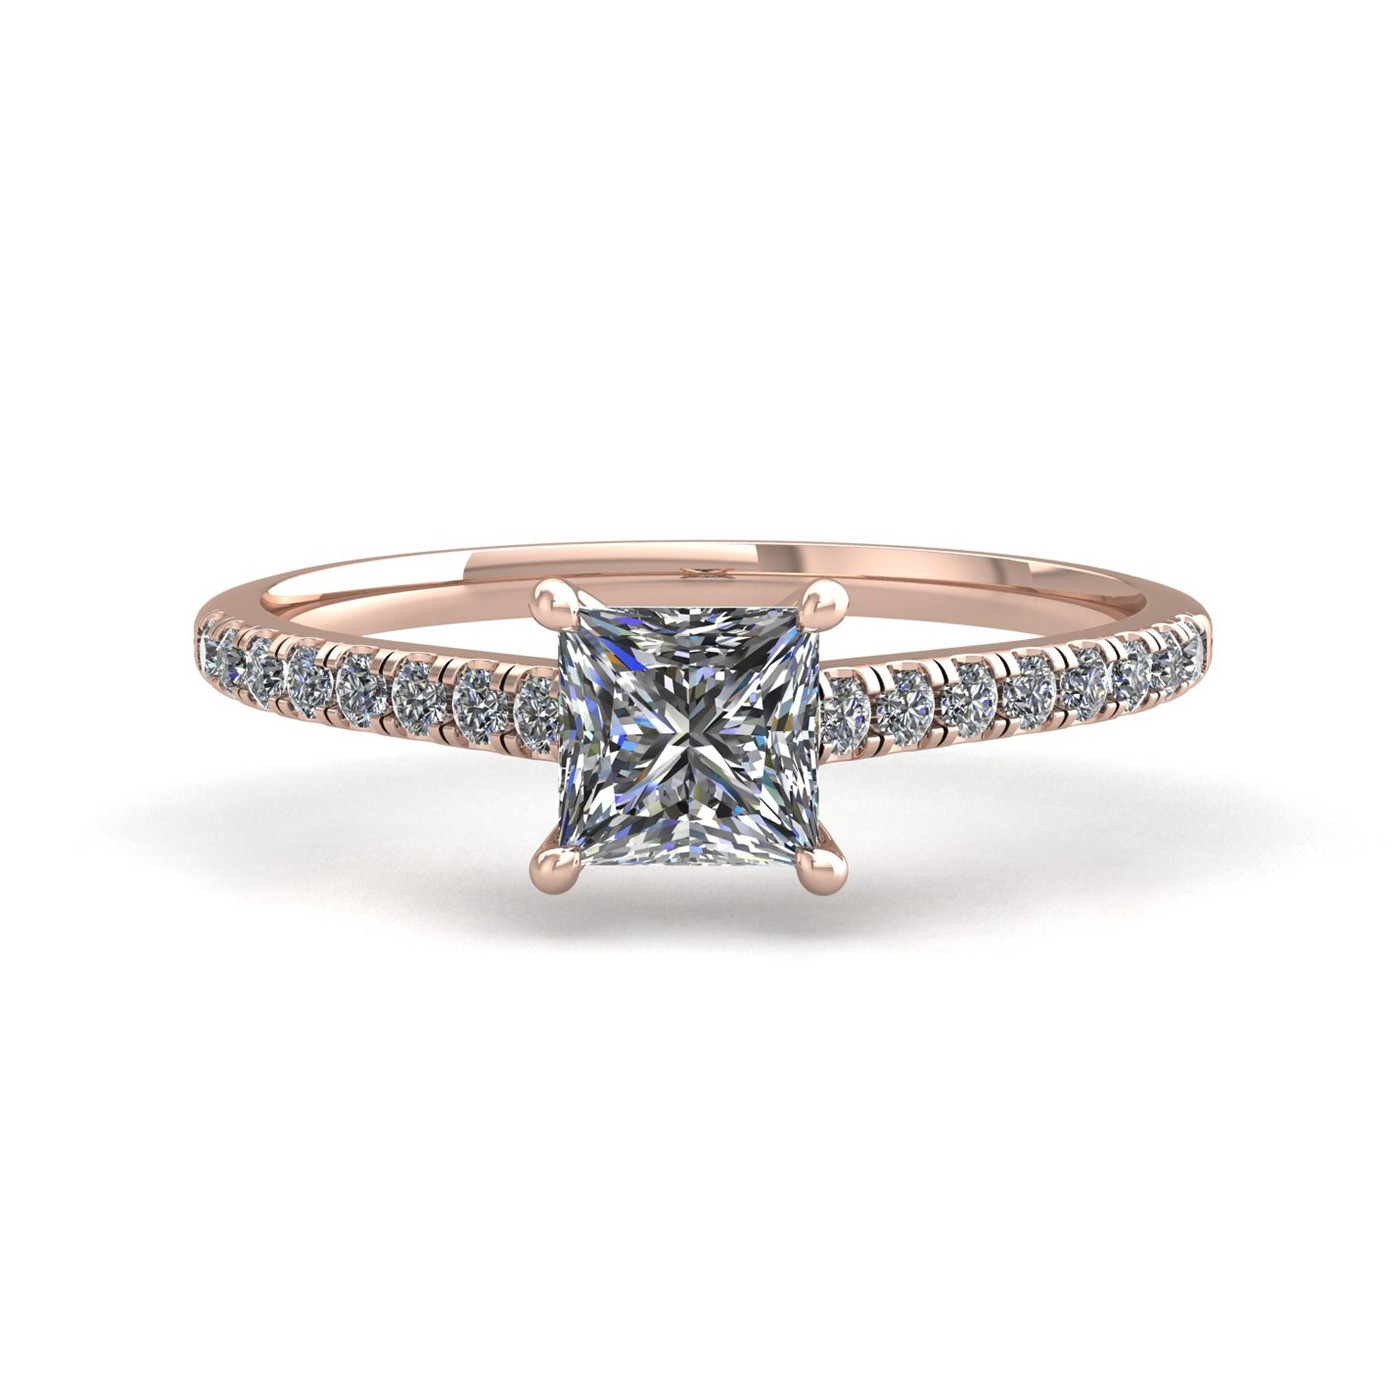 18k rose gold  1,00 ct 4 prongs princess cut diamond engagement ring with whisper thin pavÉ set band Photos & images